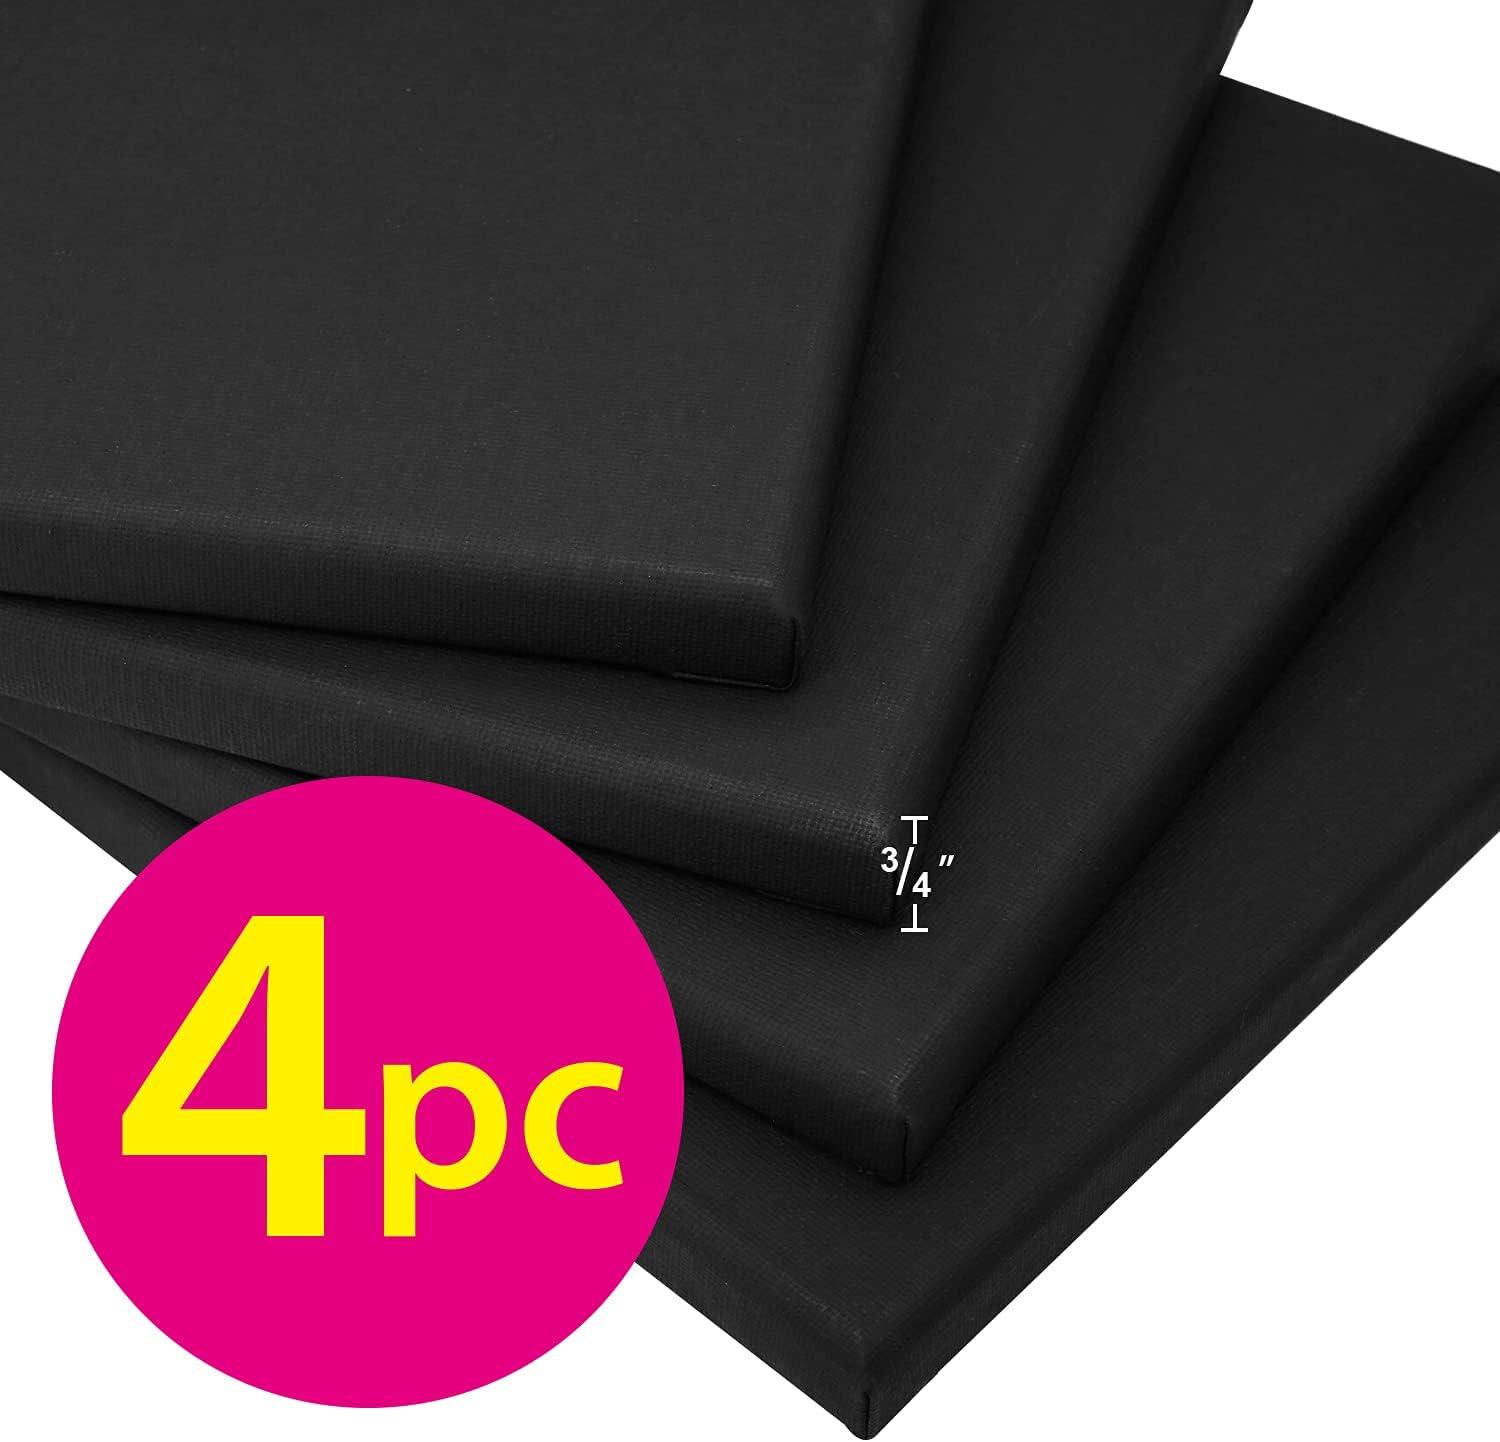  PHOENIX Black Canvas Boards for Painting - 6x6 Inch, 6